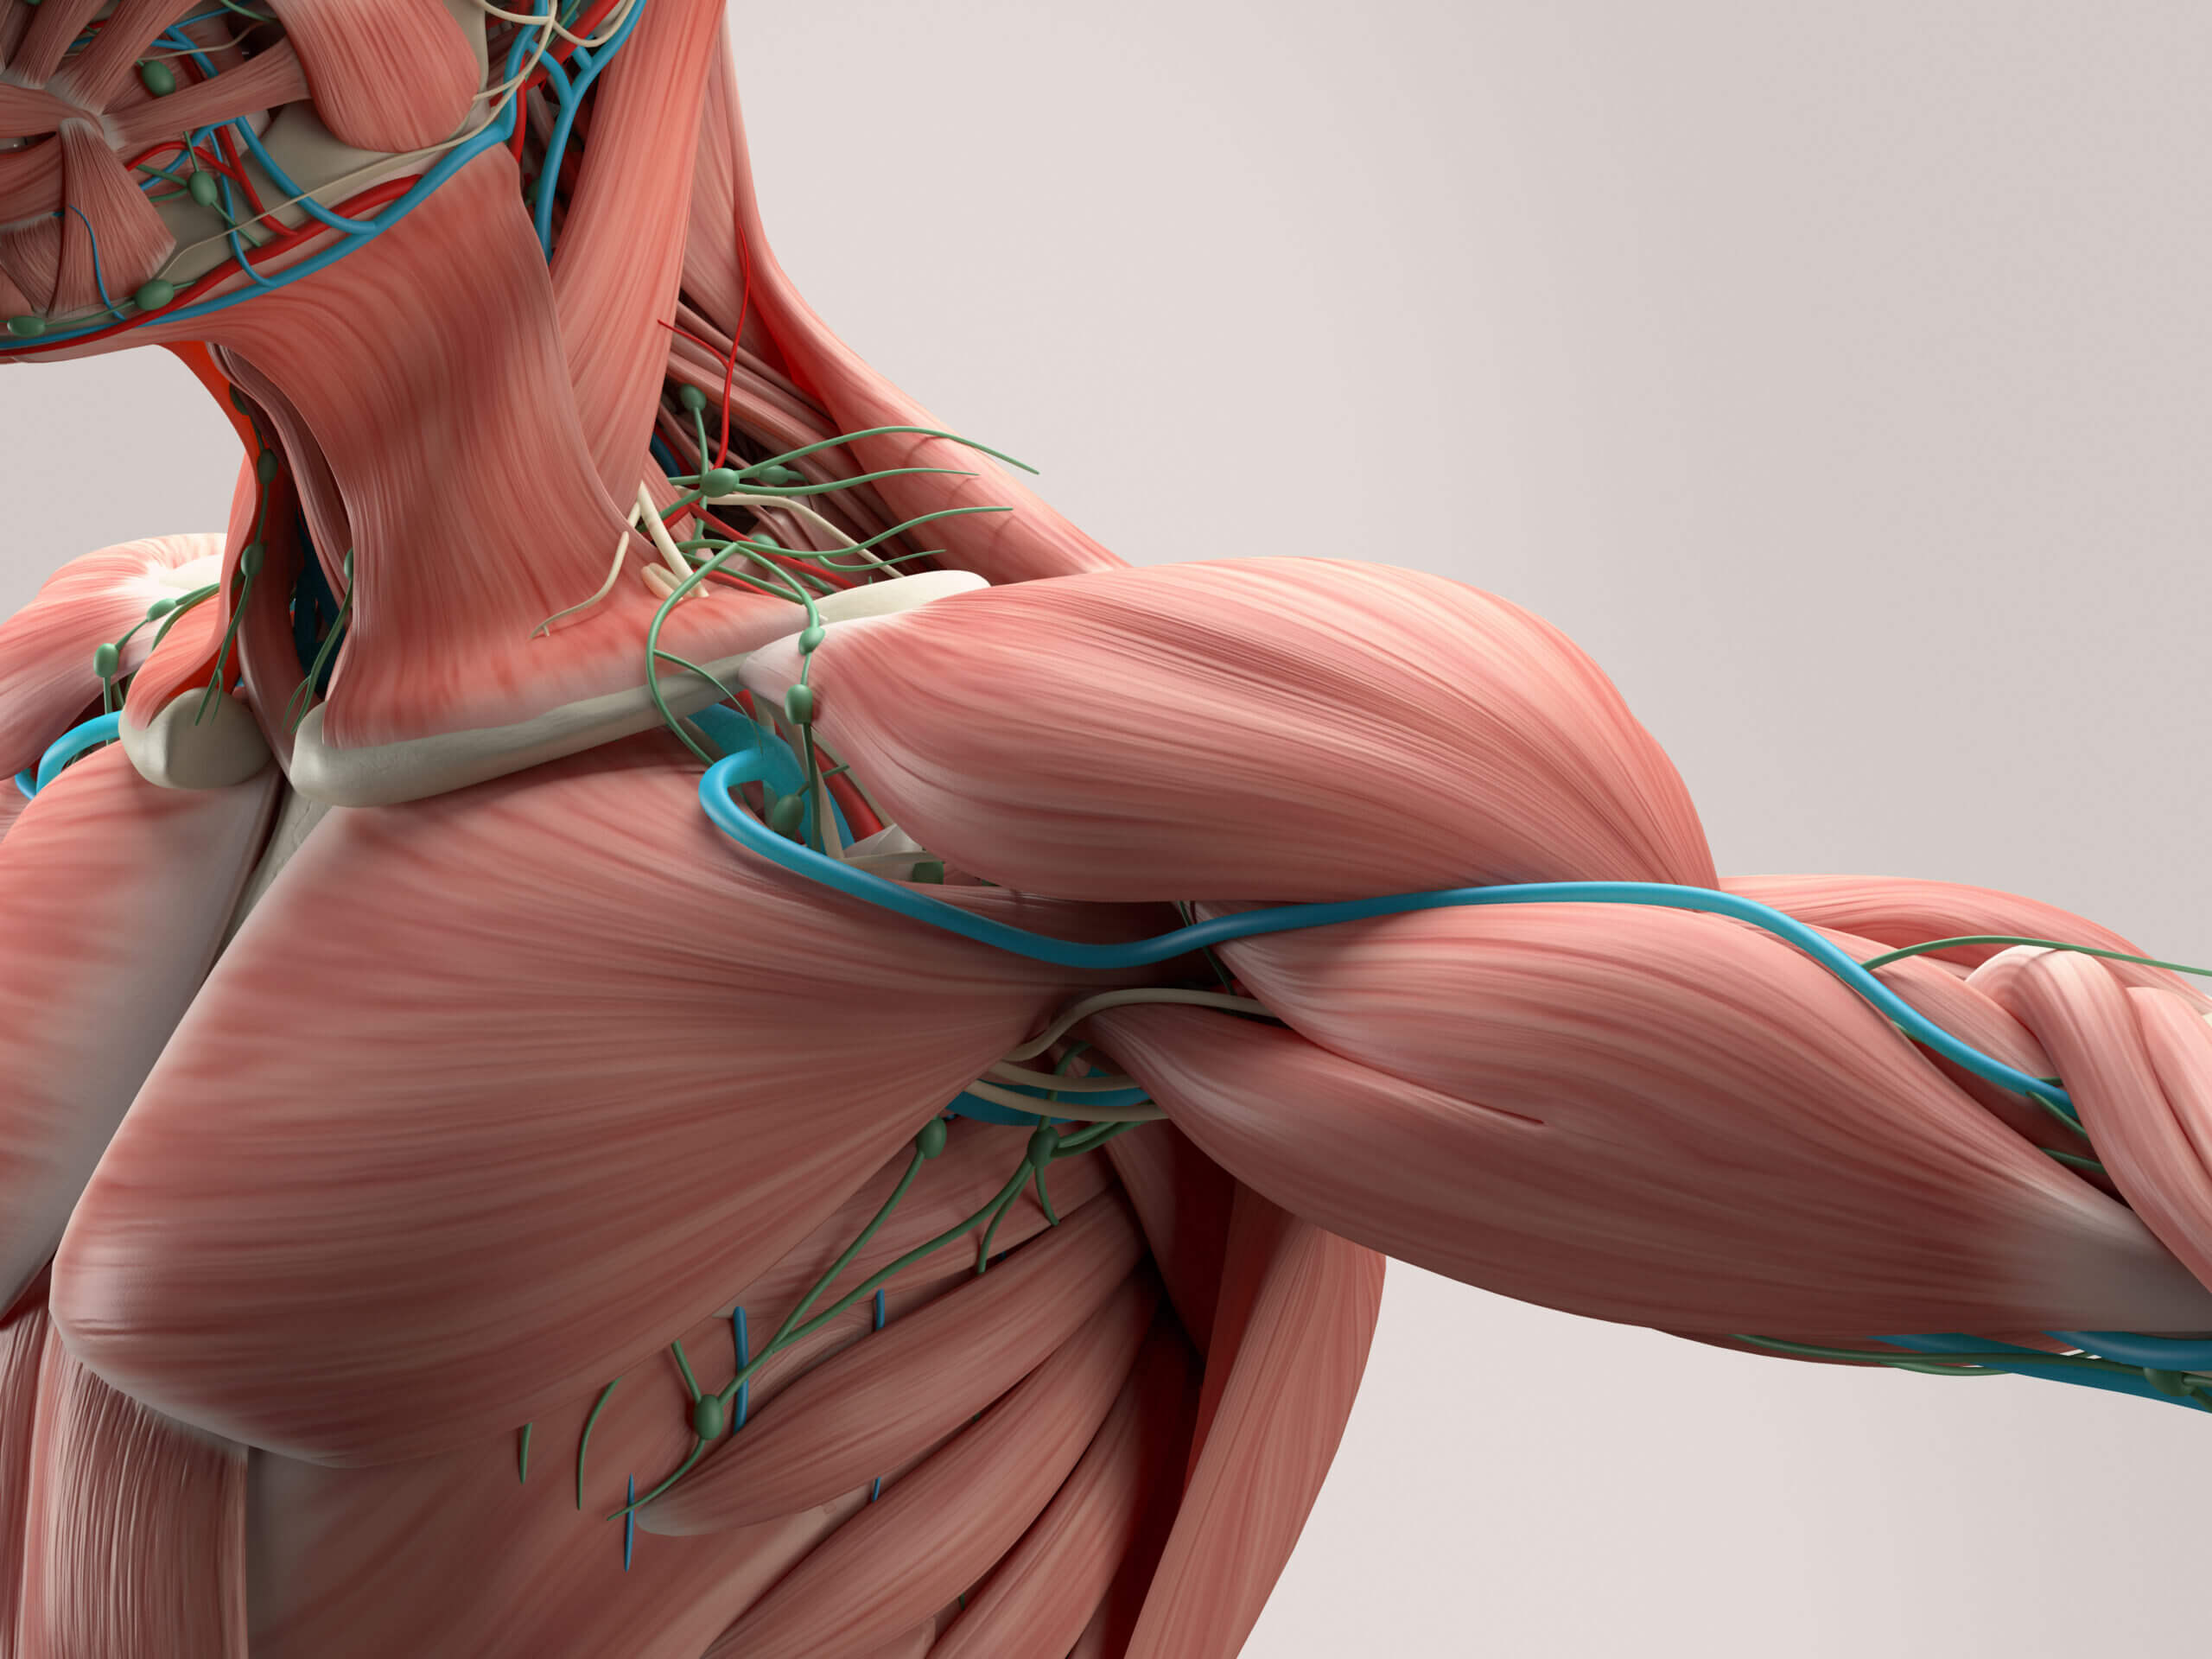 The human muscular system.